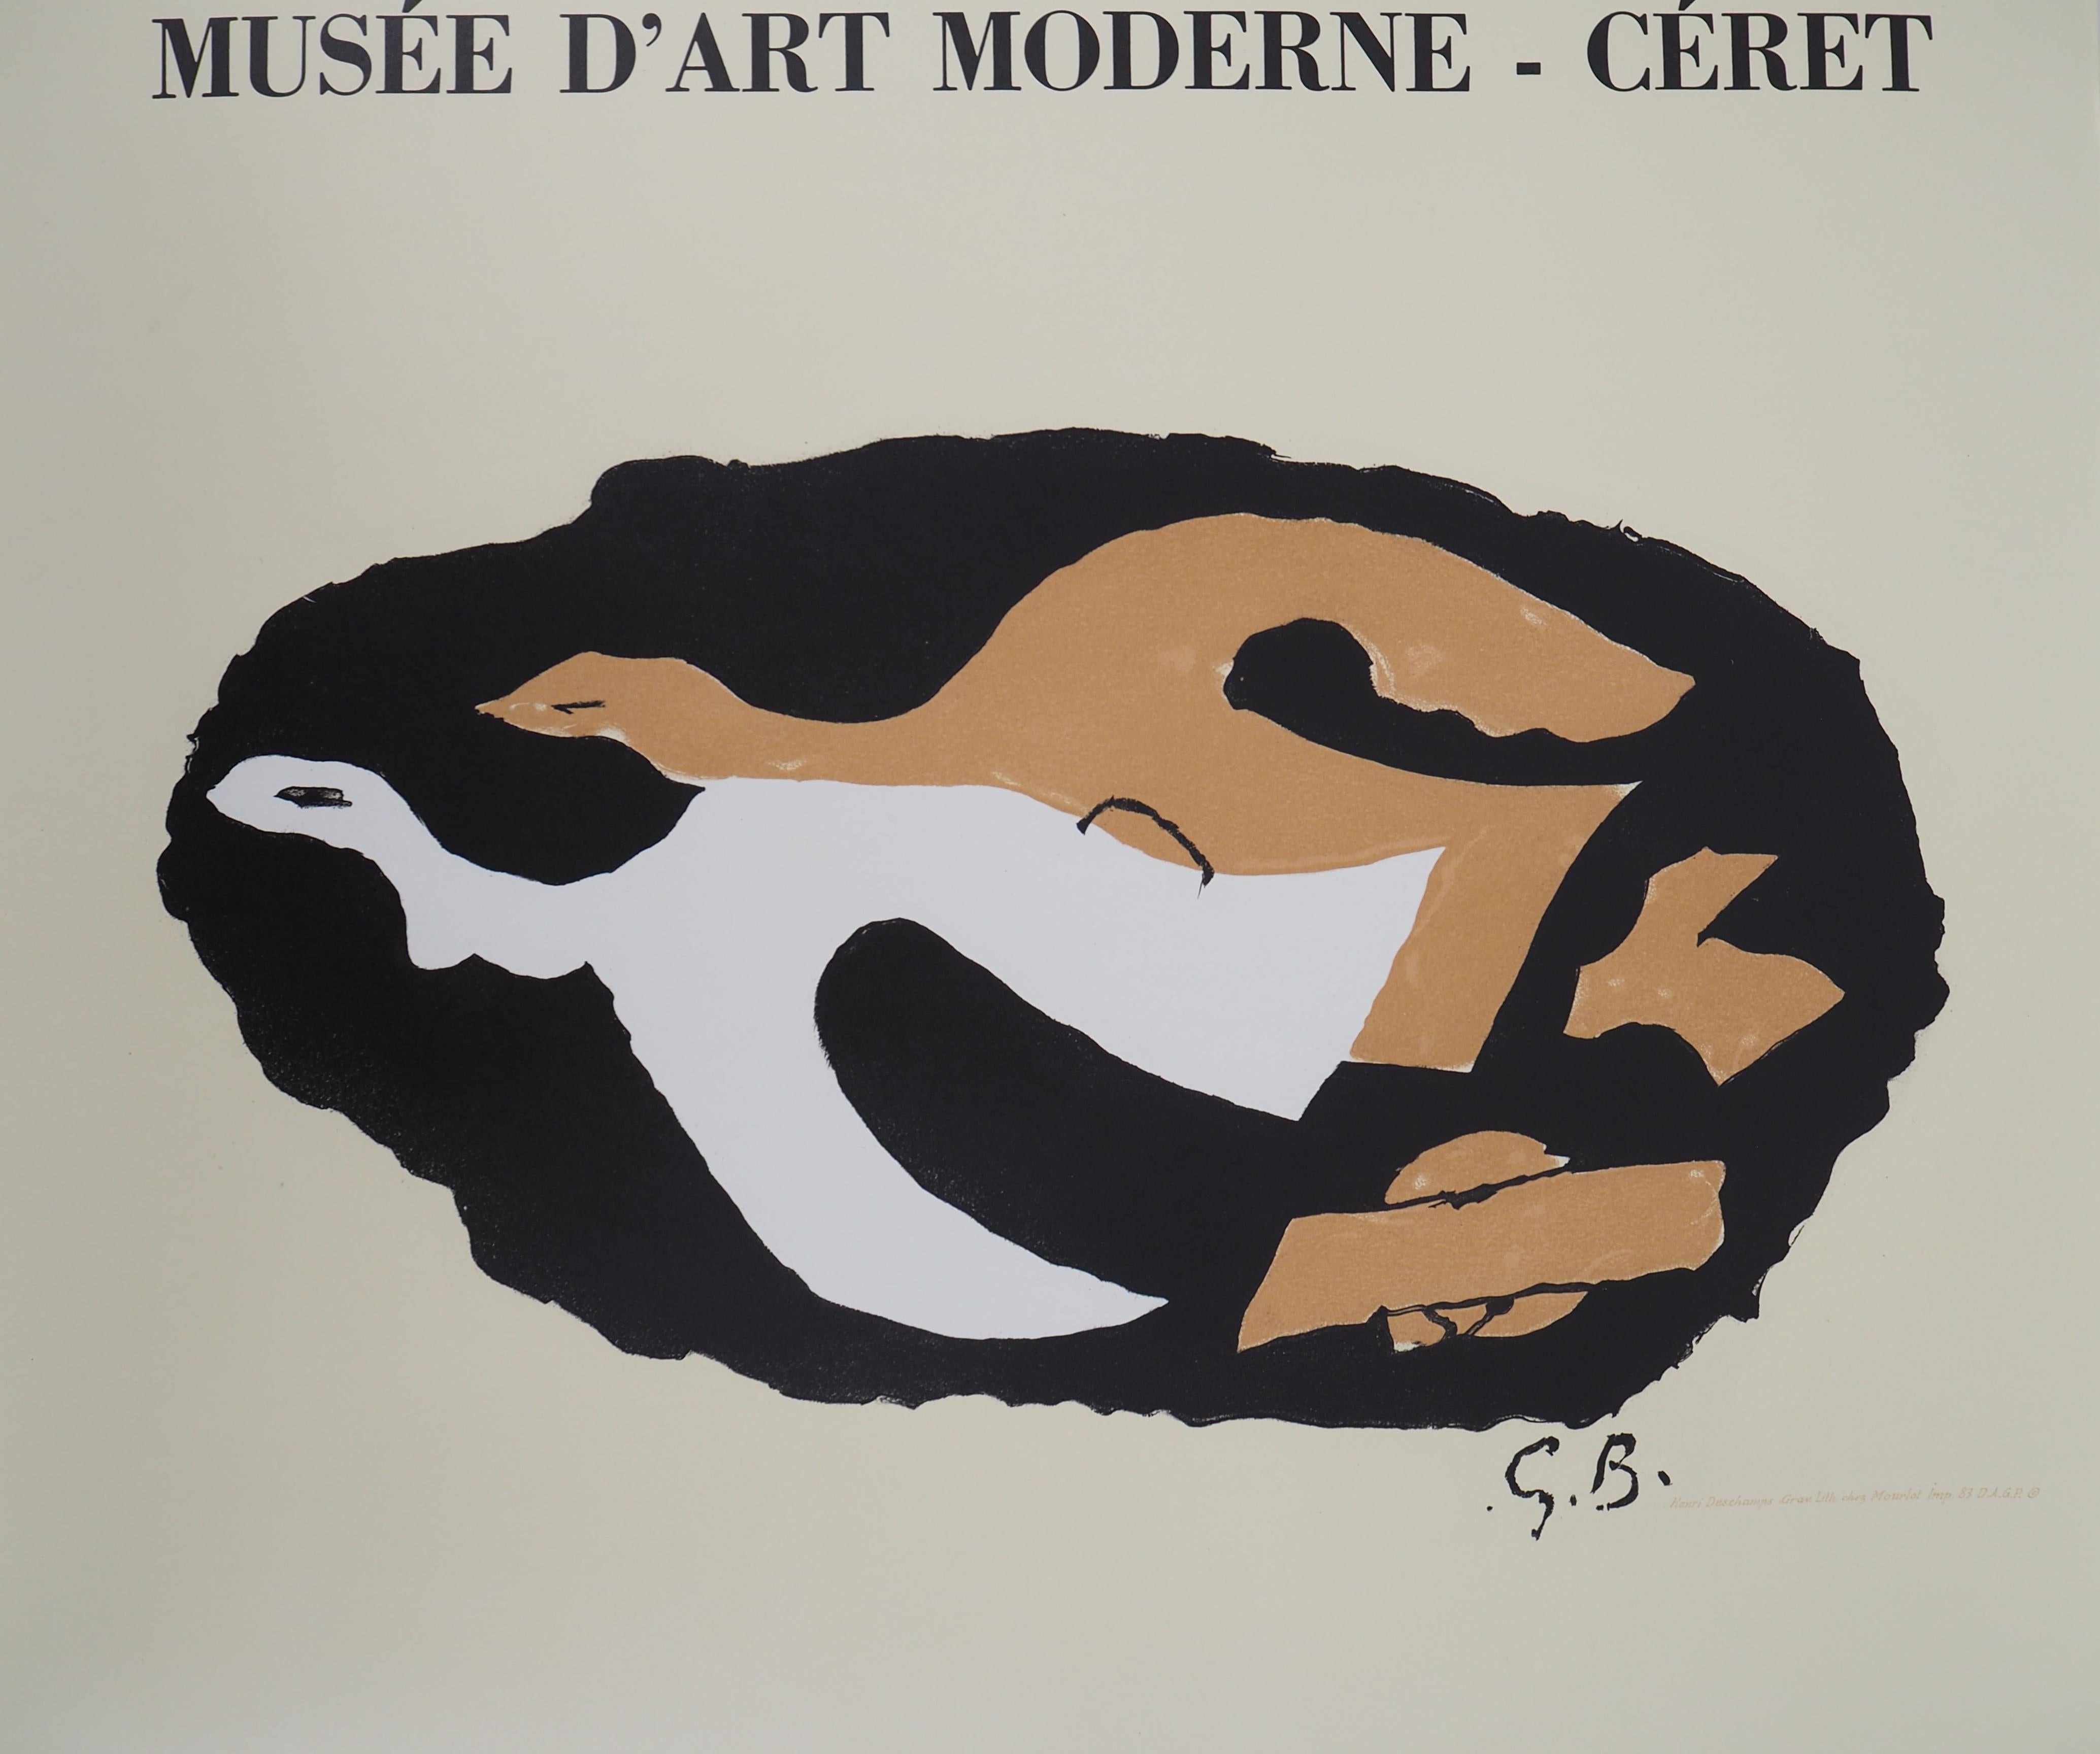 Two Birds Flying - Vintage lithograph exhibition poster # Mourlot - Print by Georges Braque